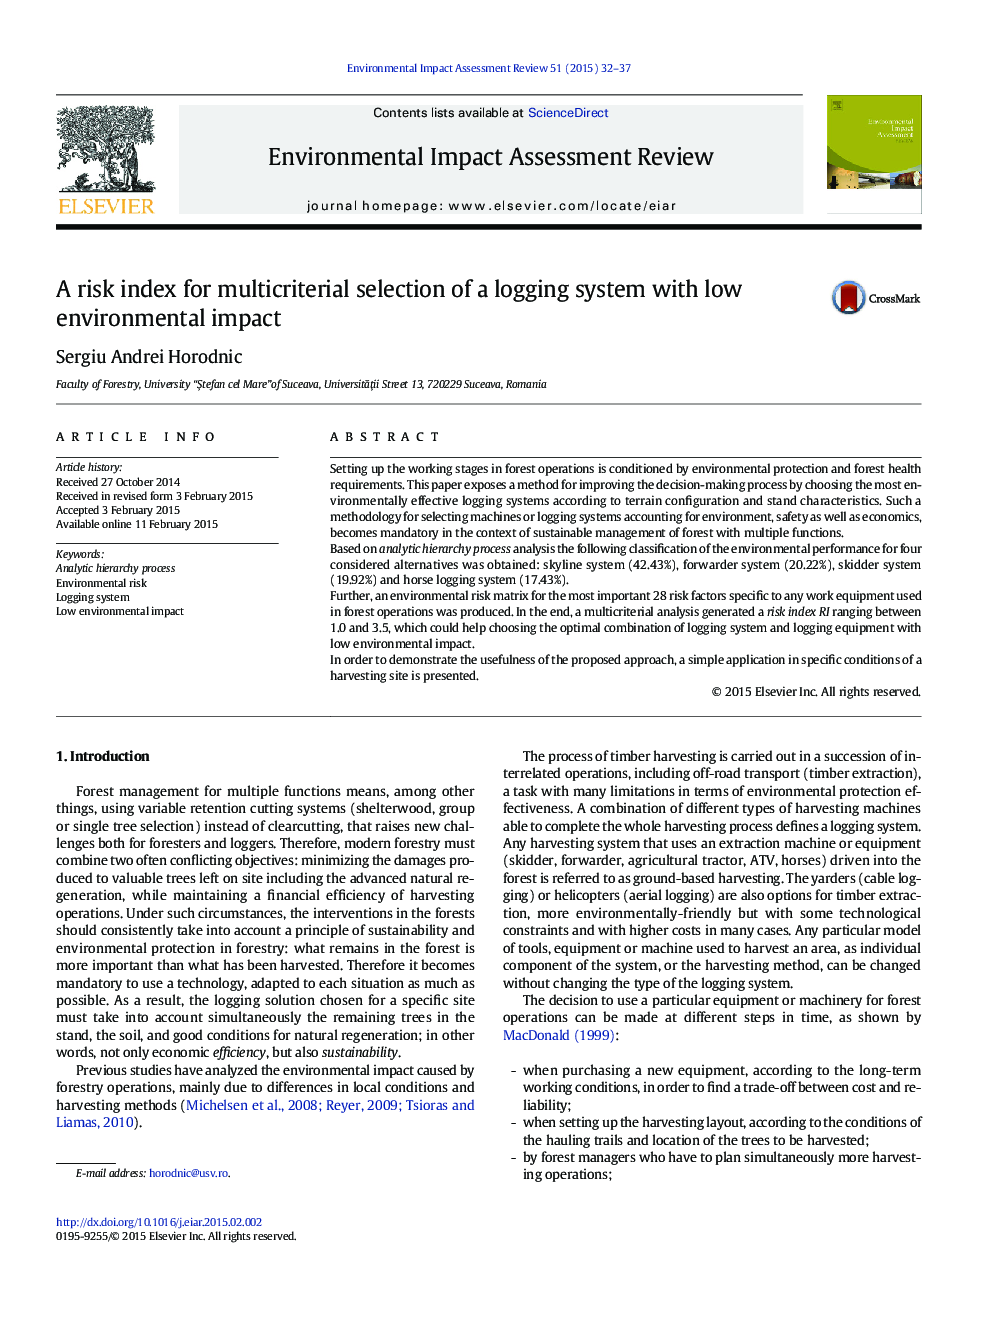 A risk index for multicriterial selection of a logging system with low environmental impact